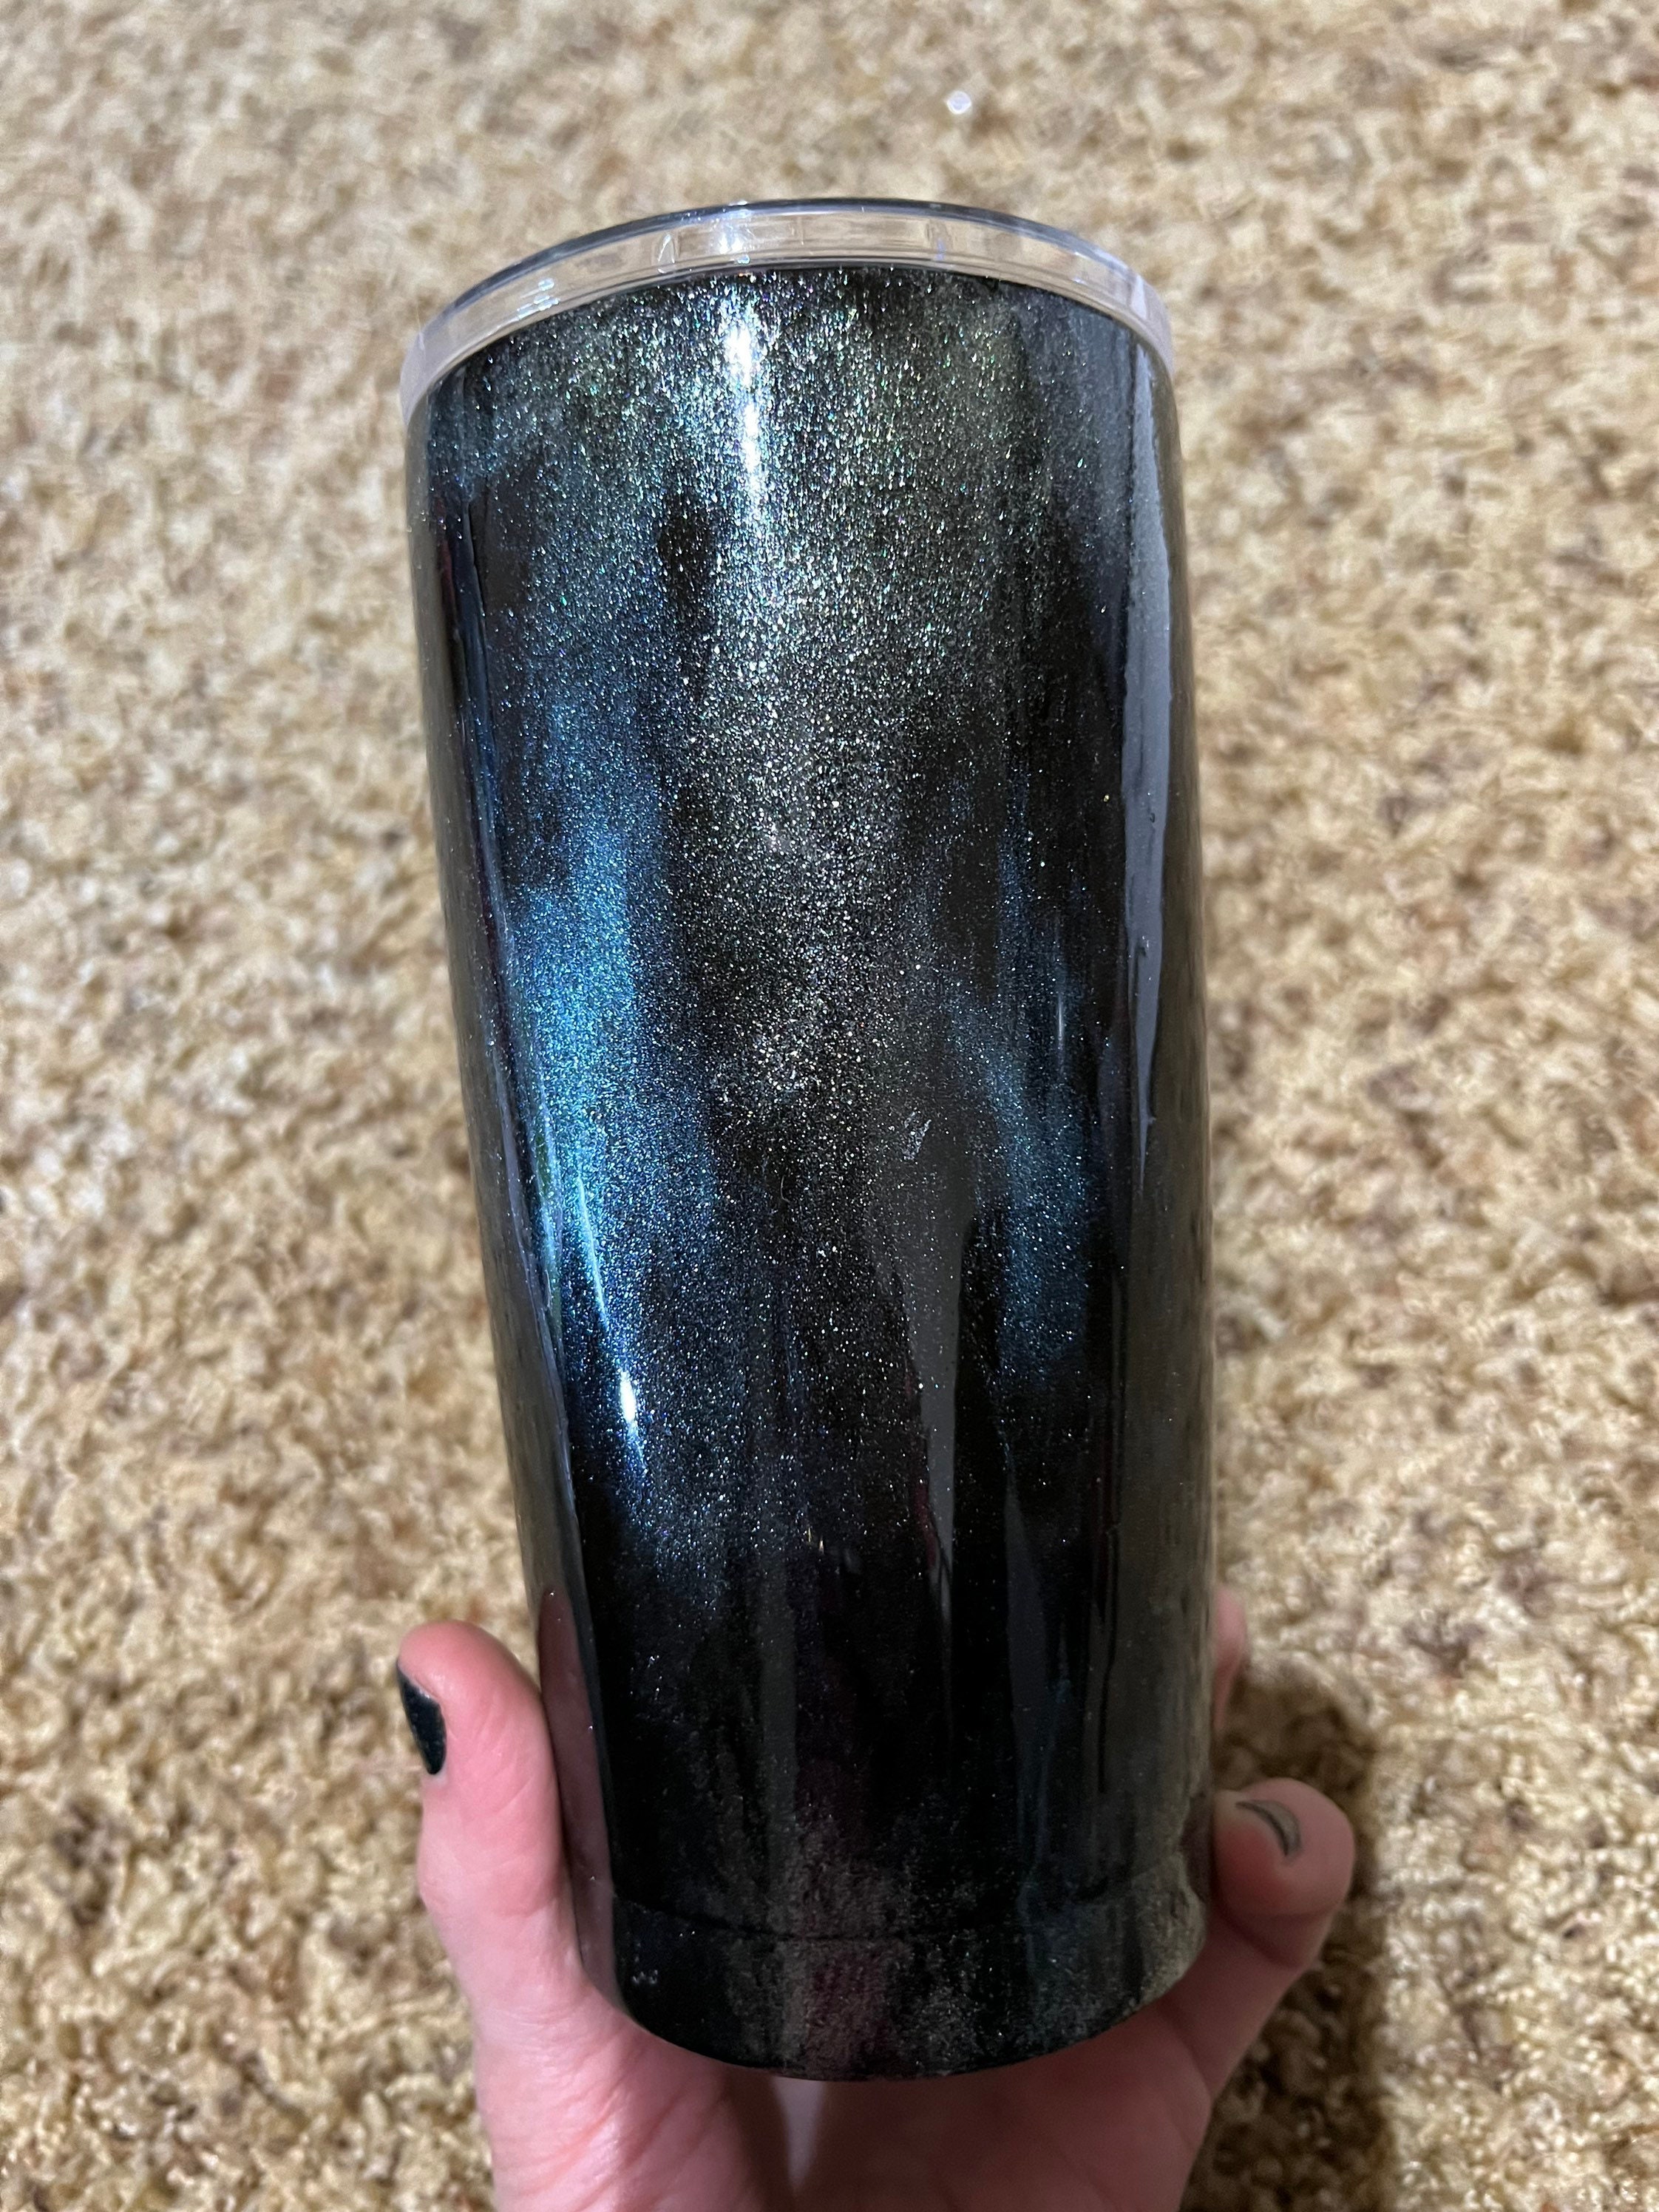 Alabama Tumbler, Made With Mica Powders, Vinyl and Waterslides